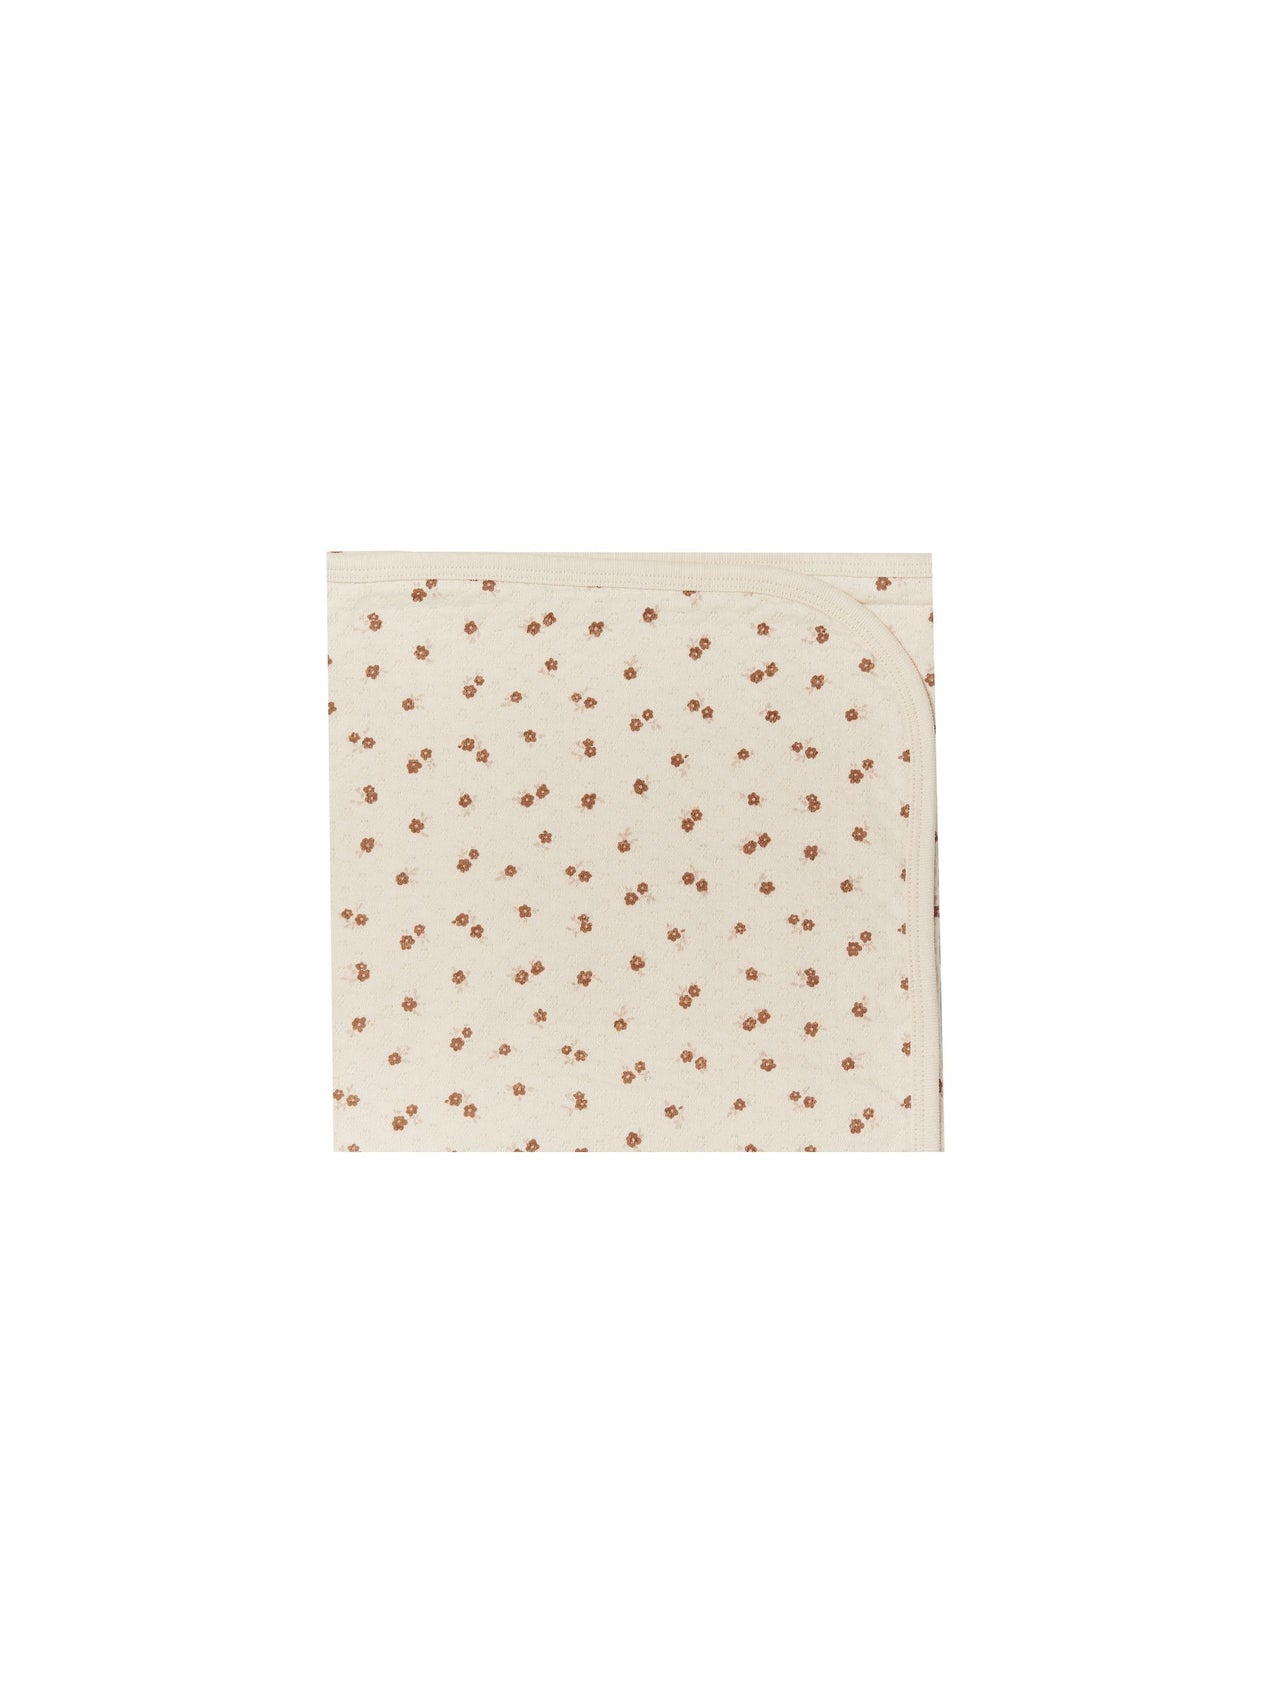 Pointelle Baby Blanket- Natural Petite Floral